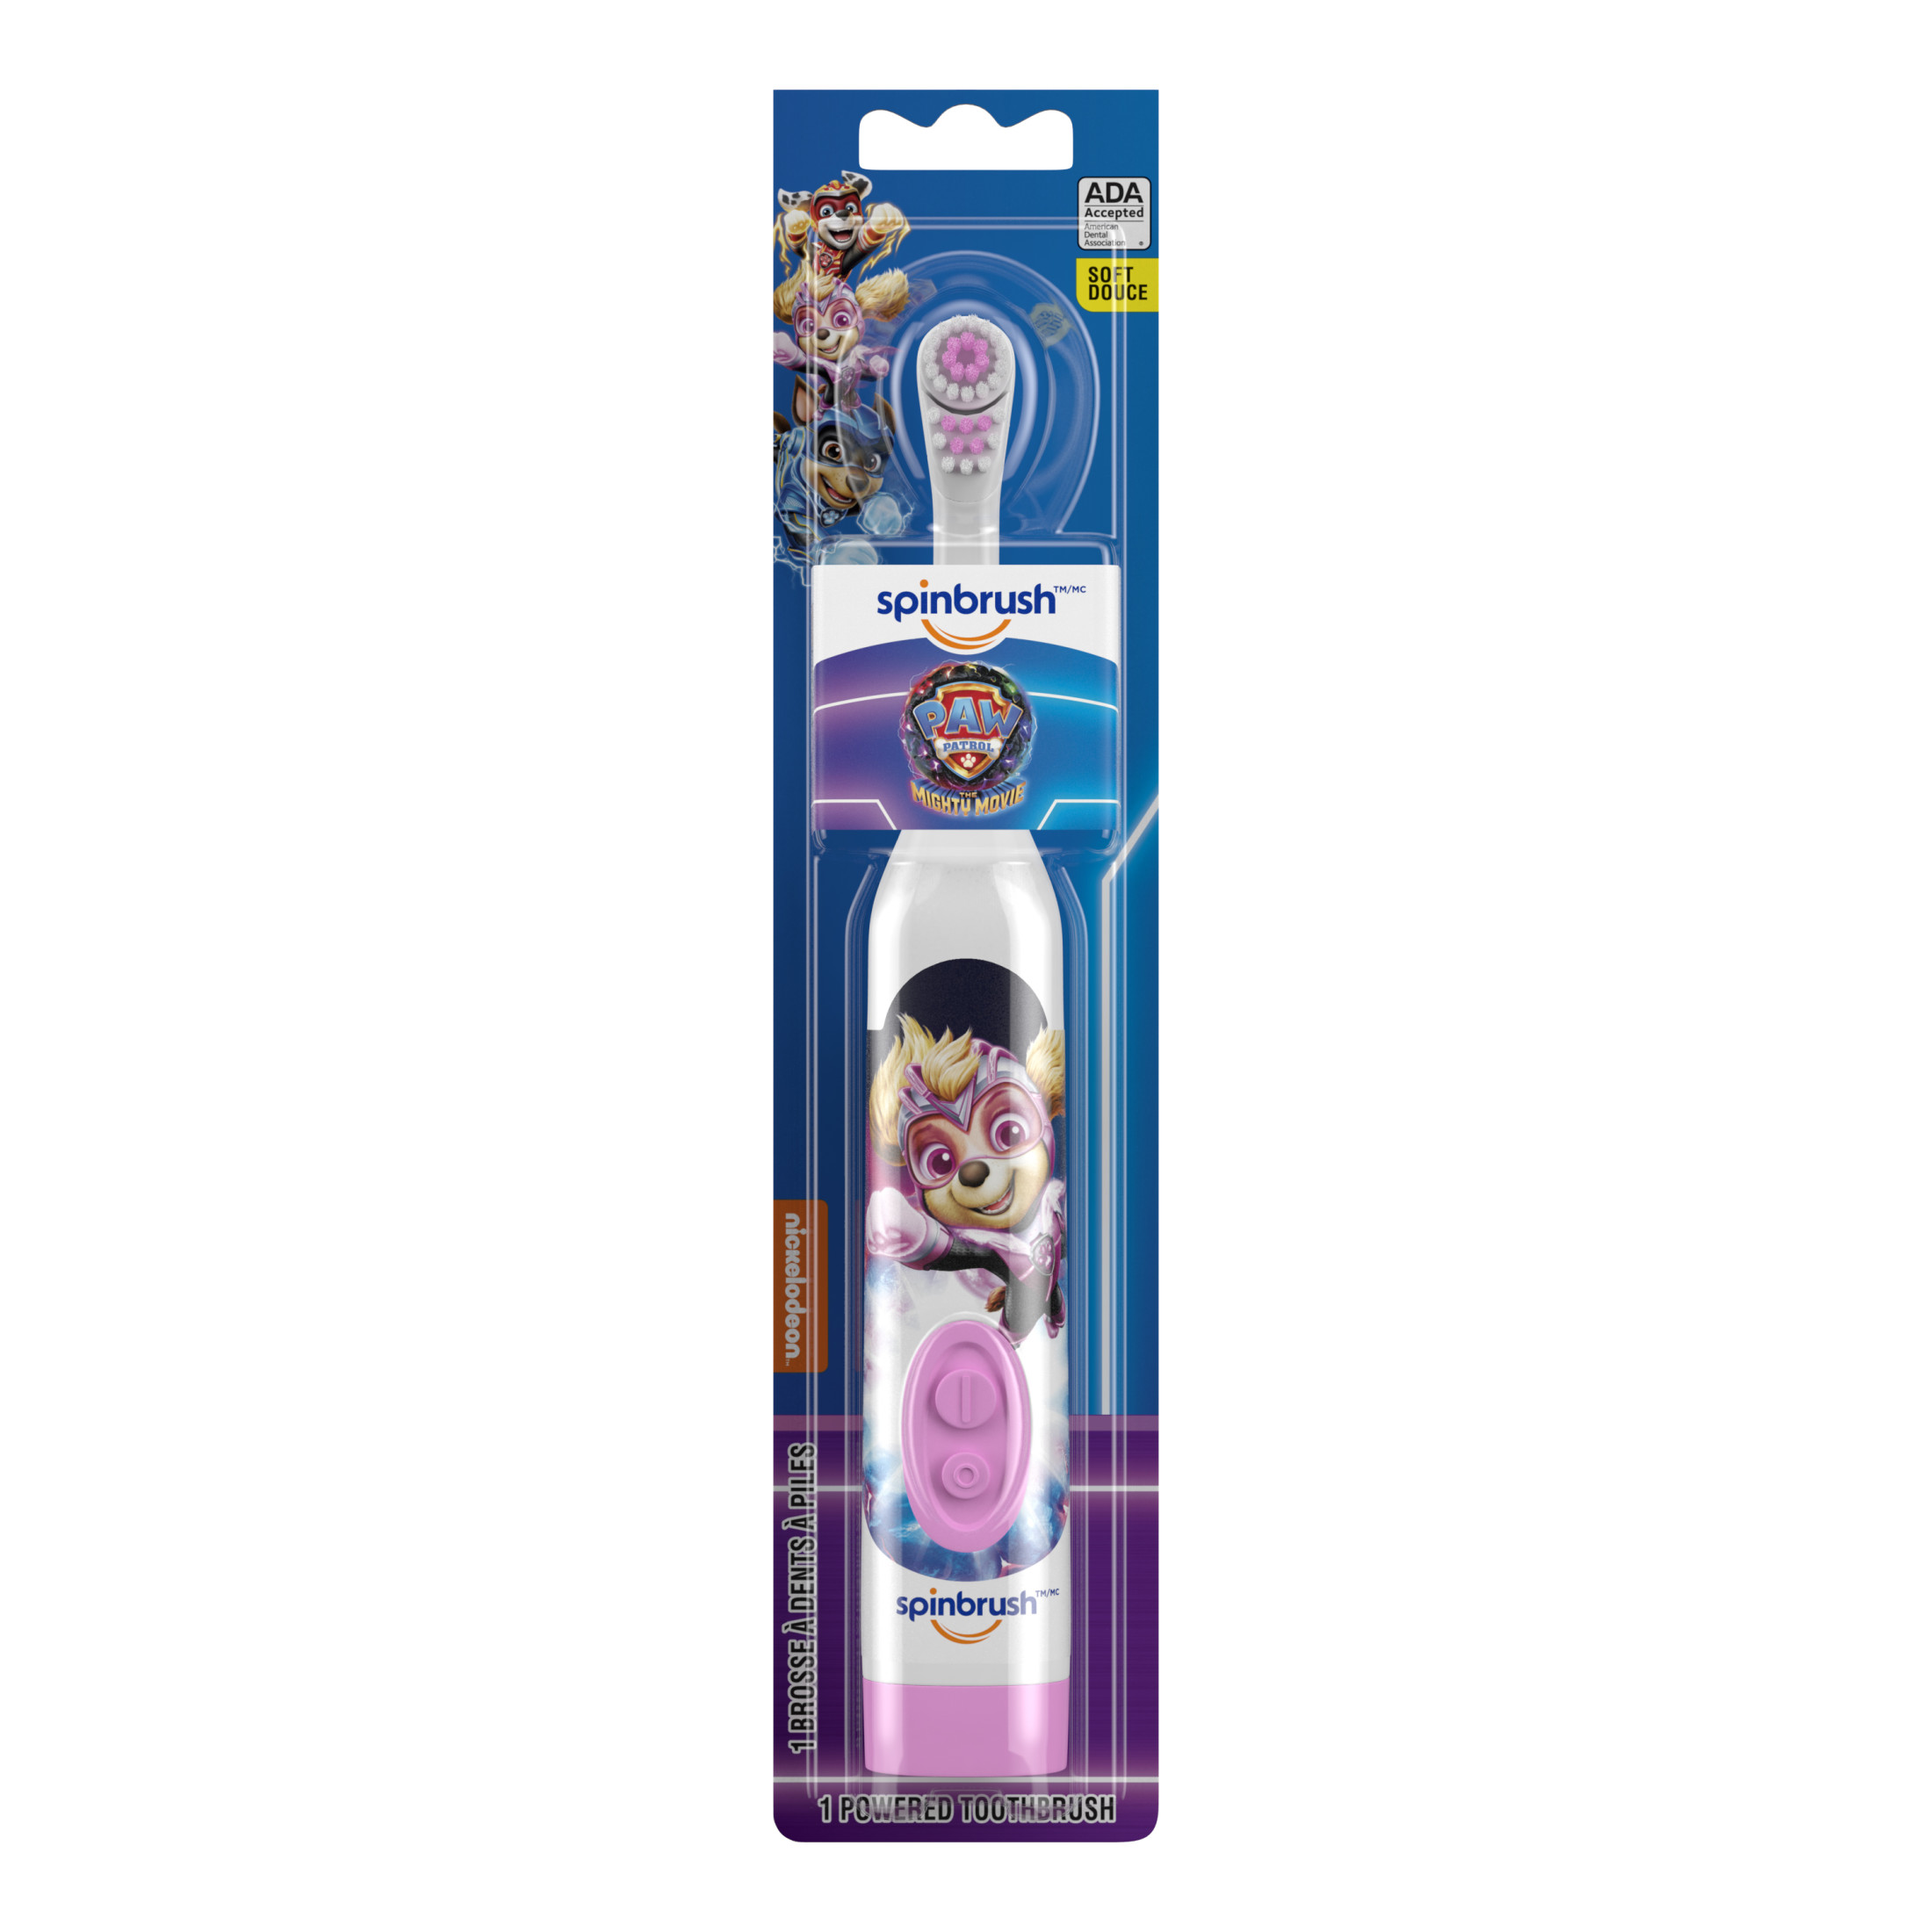 PAW Patrol Spinbrush Kids Battery-Powered Toothbrush, Soft Bristles, Ages 3+, Character May Vary - image 4 of 8